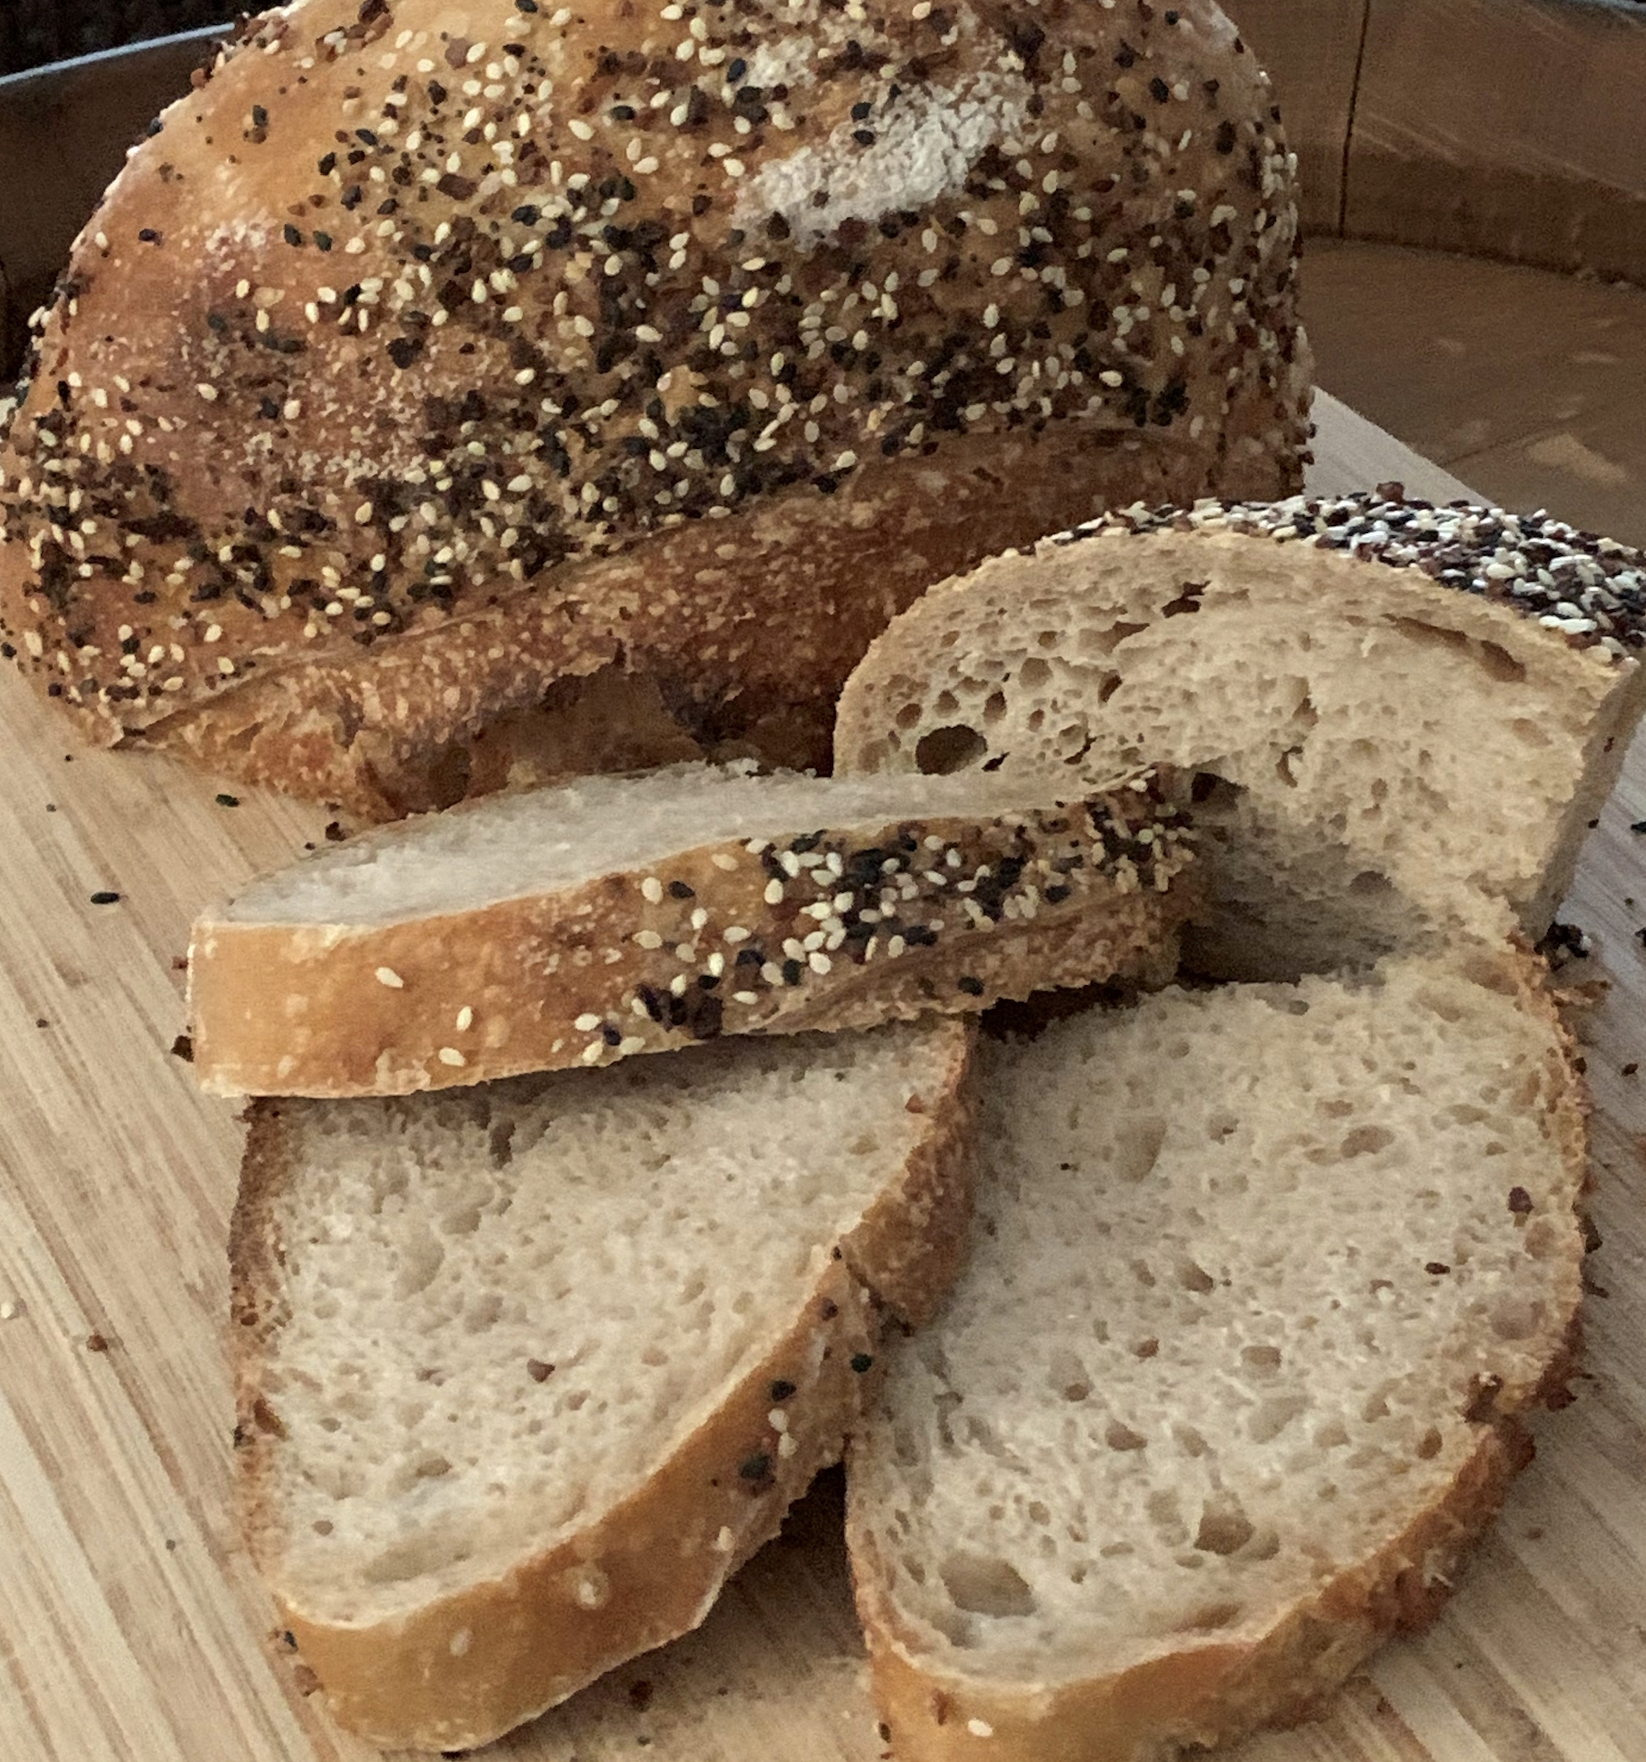 deb from everything sourdough on instagram recipes tips advice books resources social media influencer sourdough bread 2